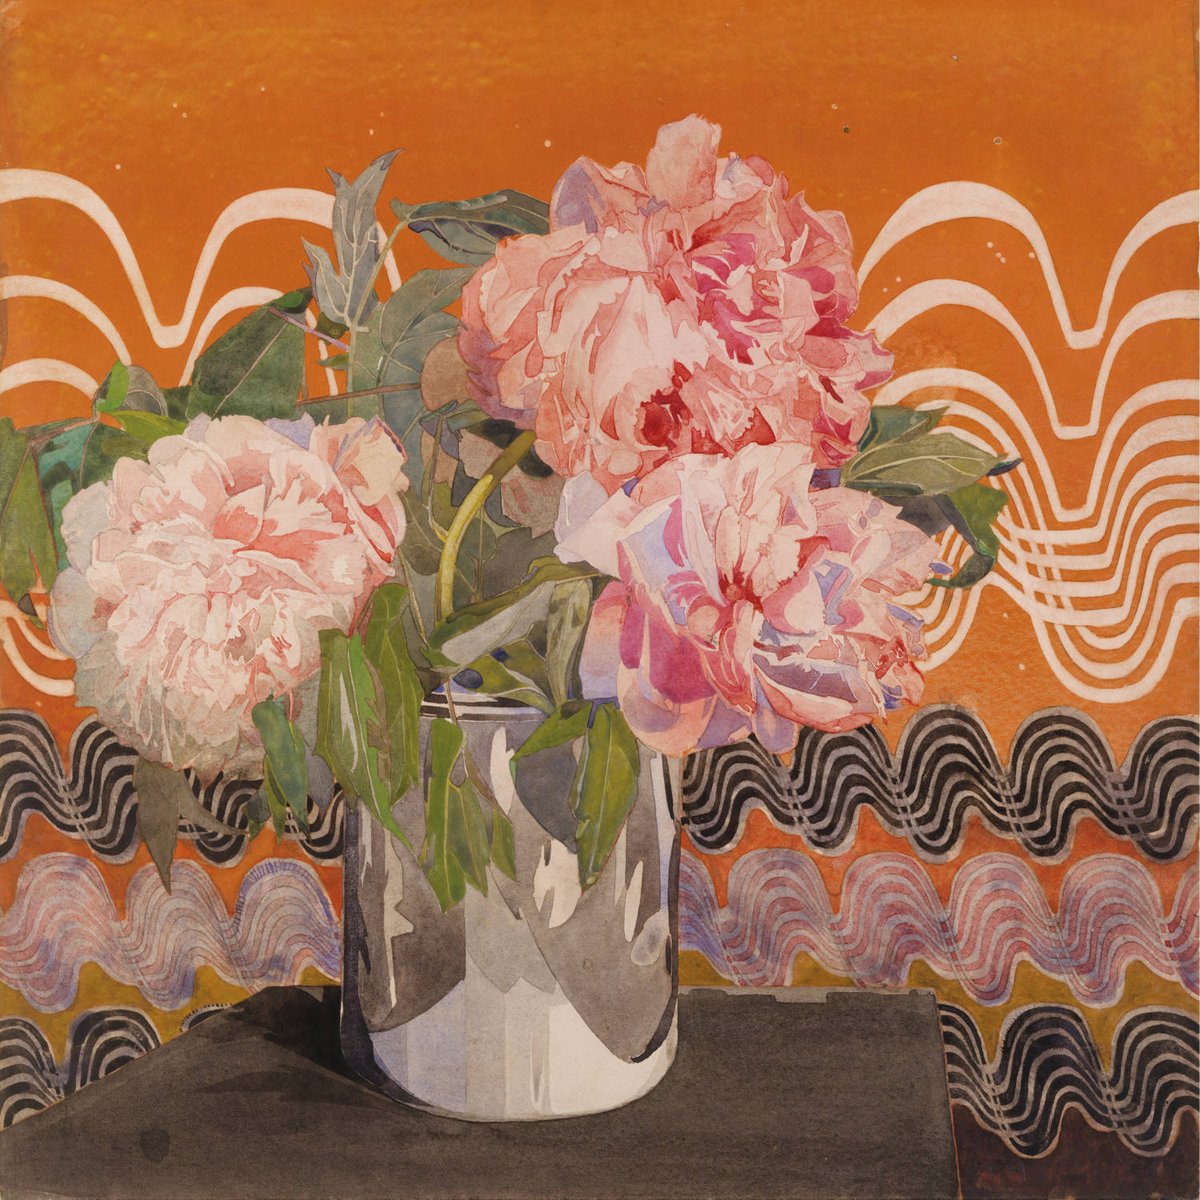 Hello gorgeous. 'Peonies'. Charles Rennie Mackintosh. c.1920. Order yours: duille.com/peonies